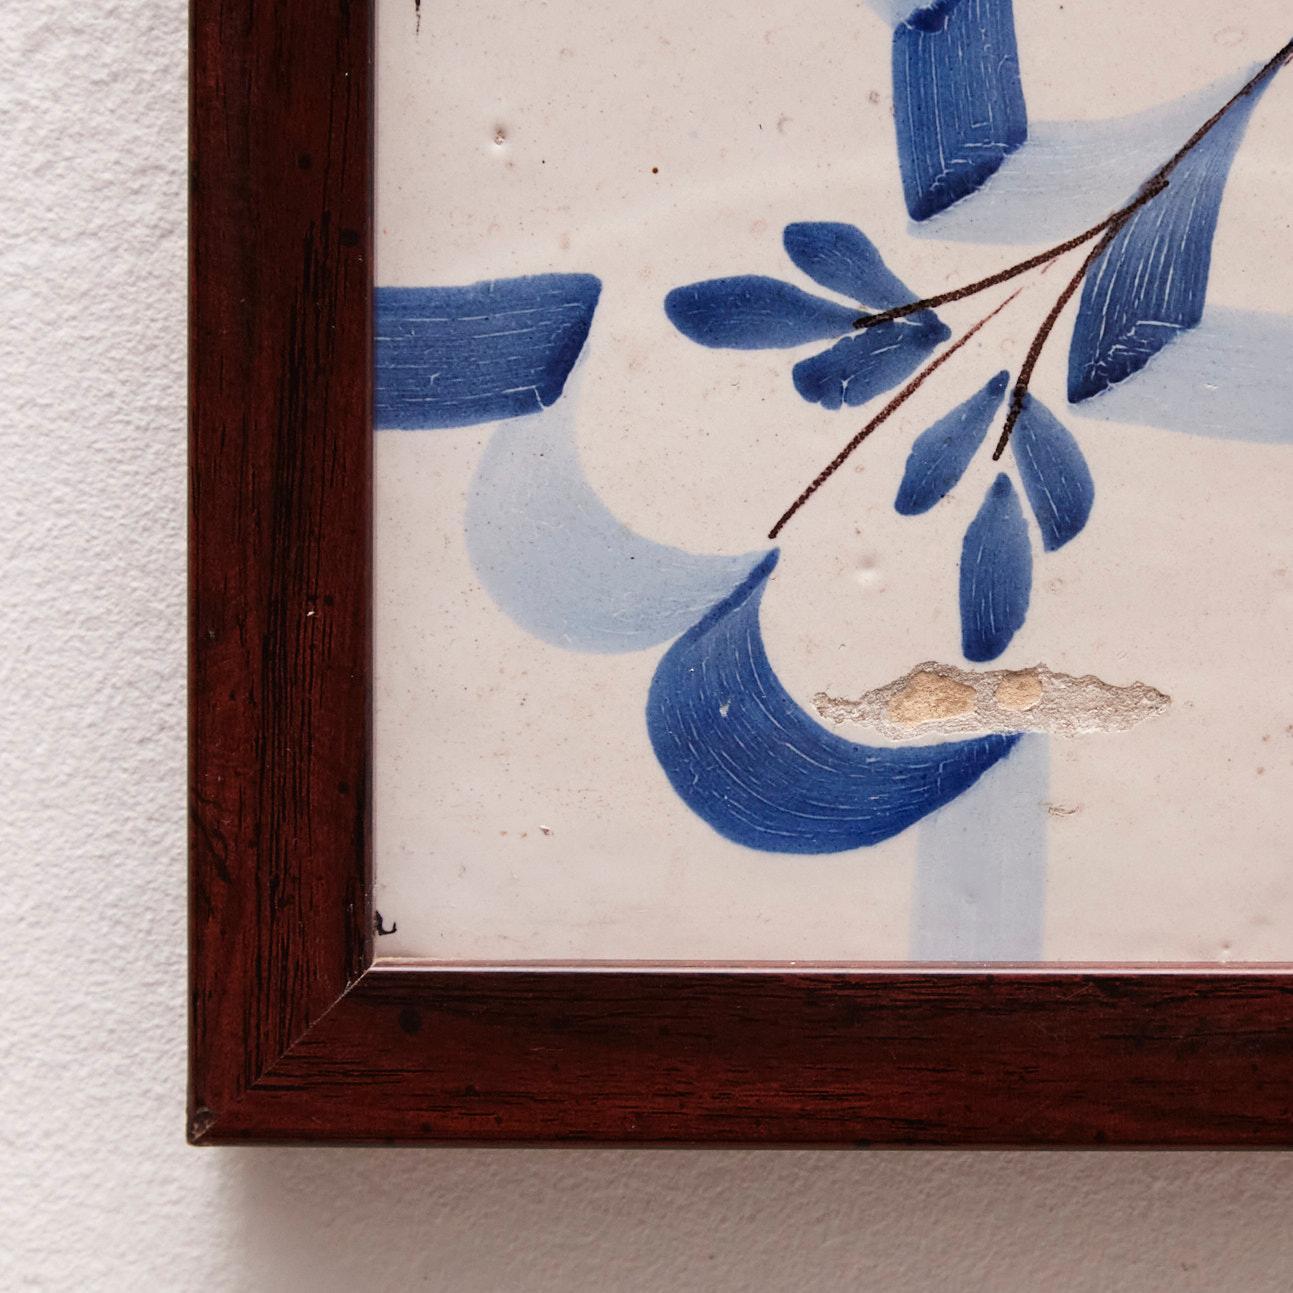 Mid-20th Century Framed Ceramic Tile Hand Painted Composition, circa 1950 For Sale